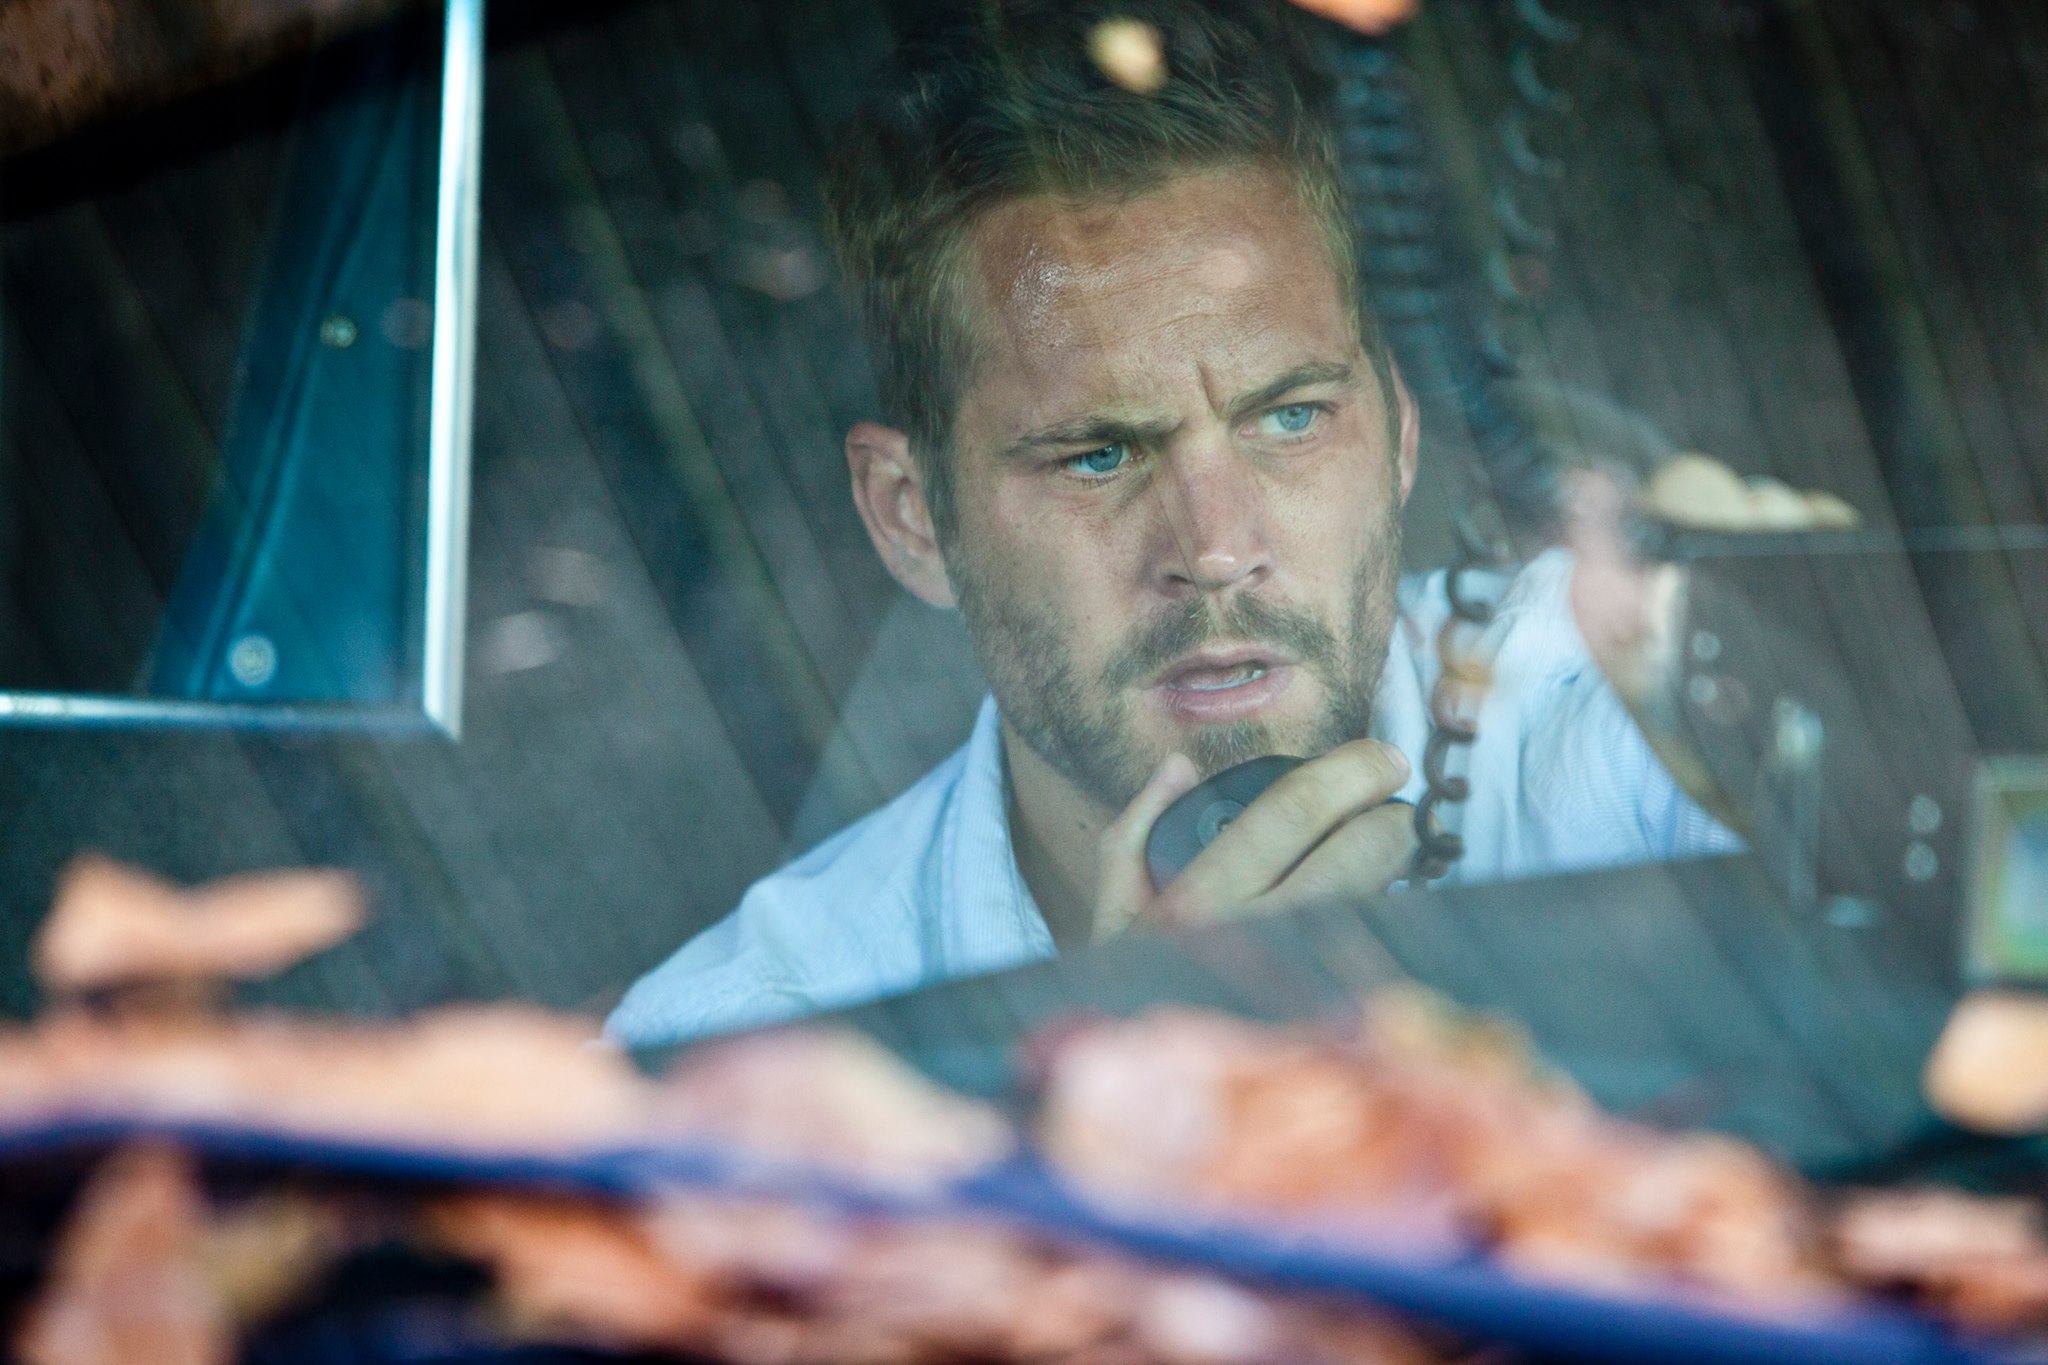 People 2048x1365 men actor movies film stills Paul Walker blue eyes car interior window Fast and Furious face